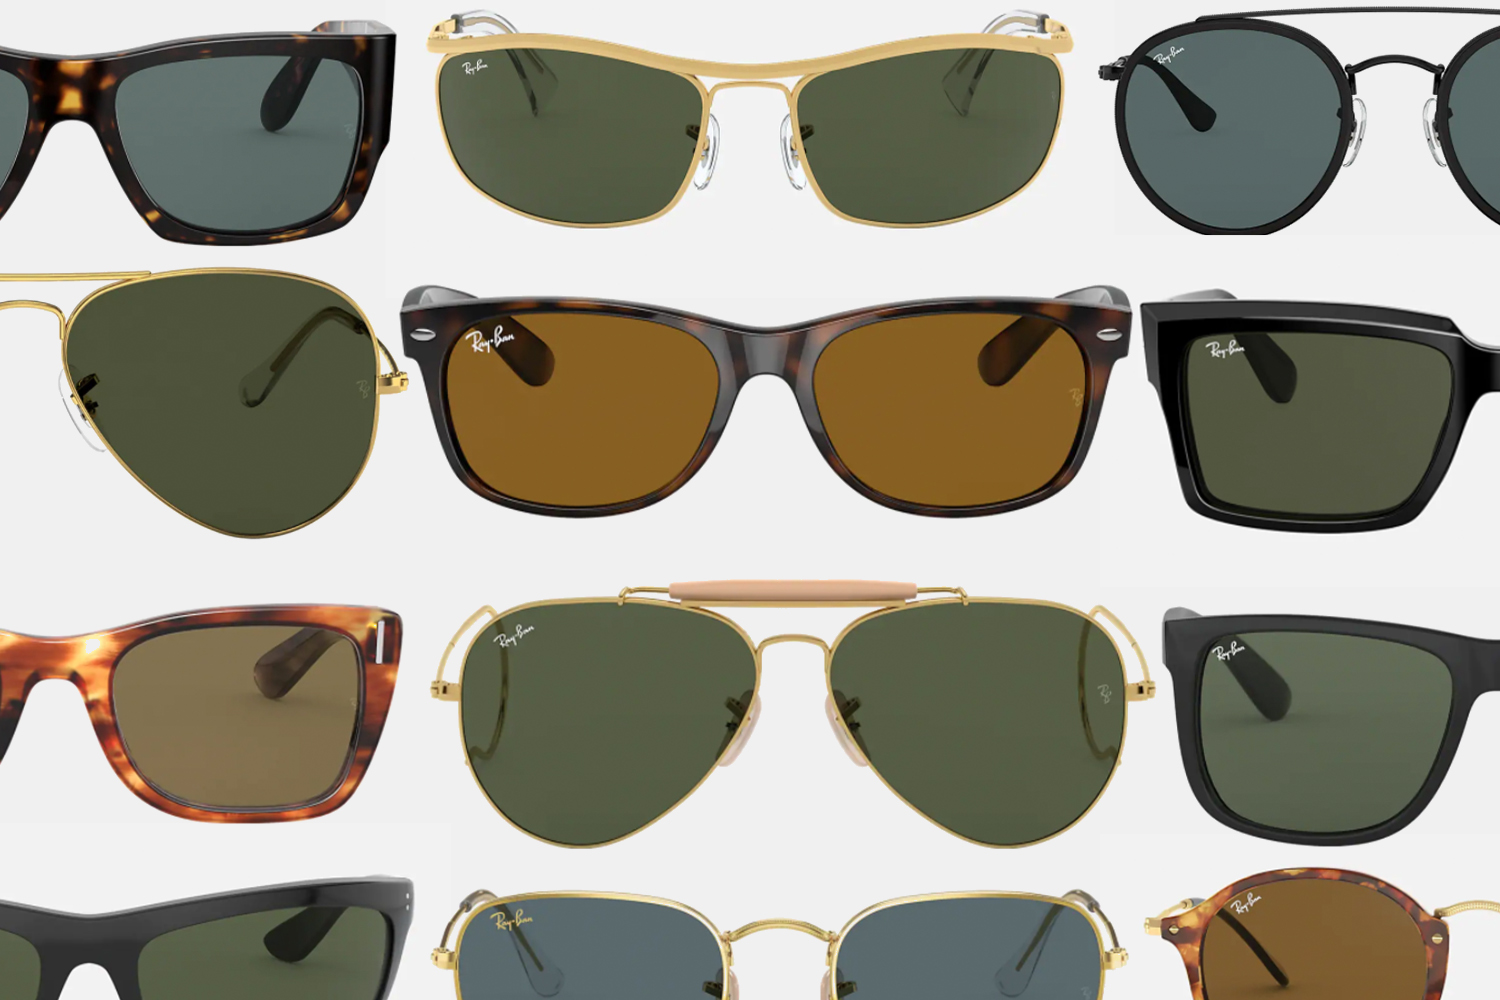 Mig selv Træde tilbage Kvarter Ray-Ban Styles: A Complete Guide to Their Sunglasses - InsideHook